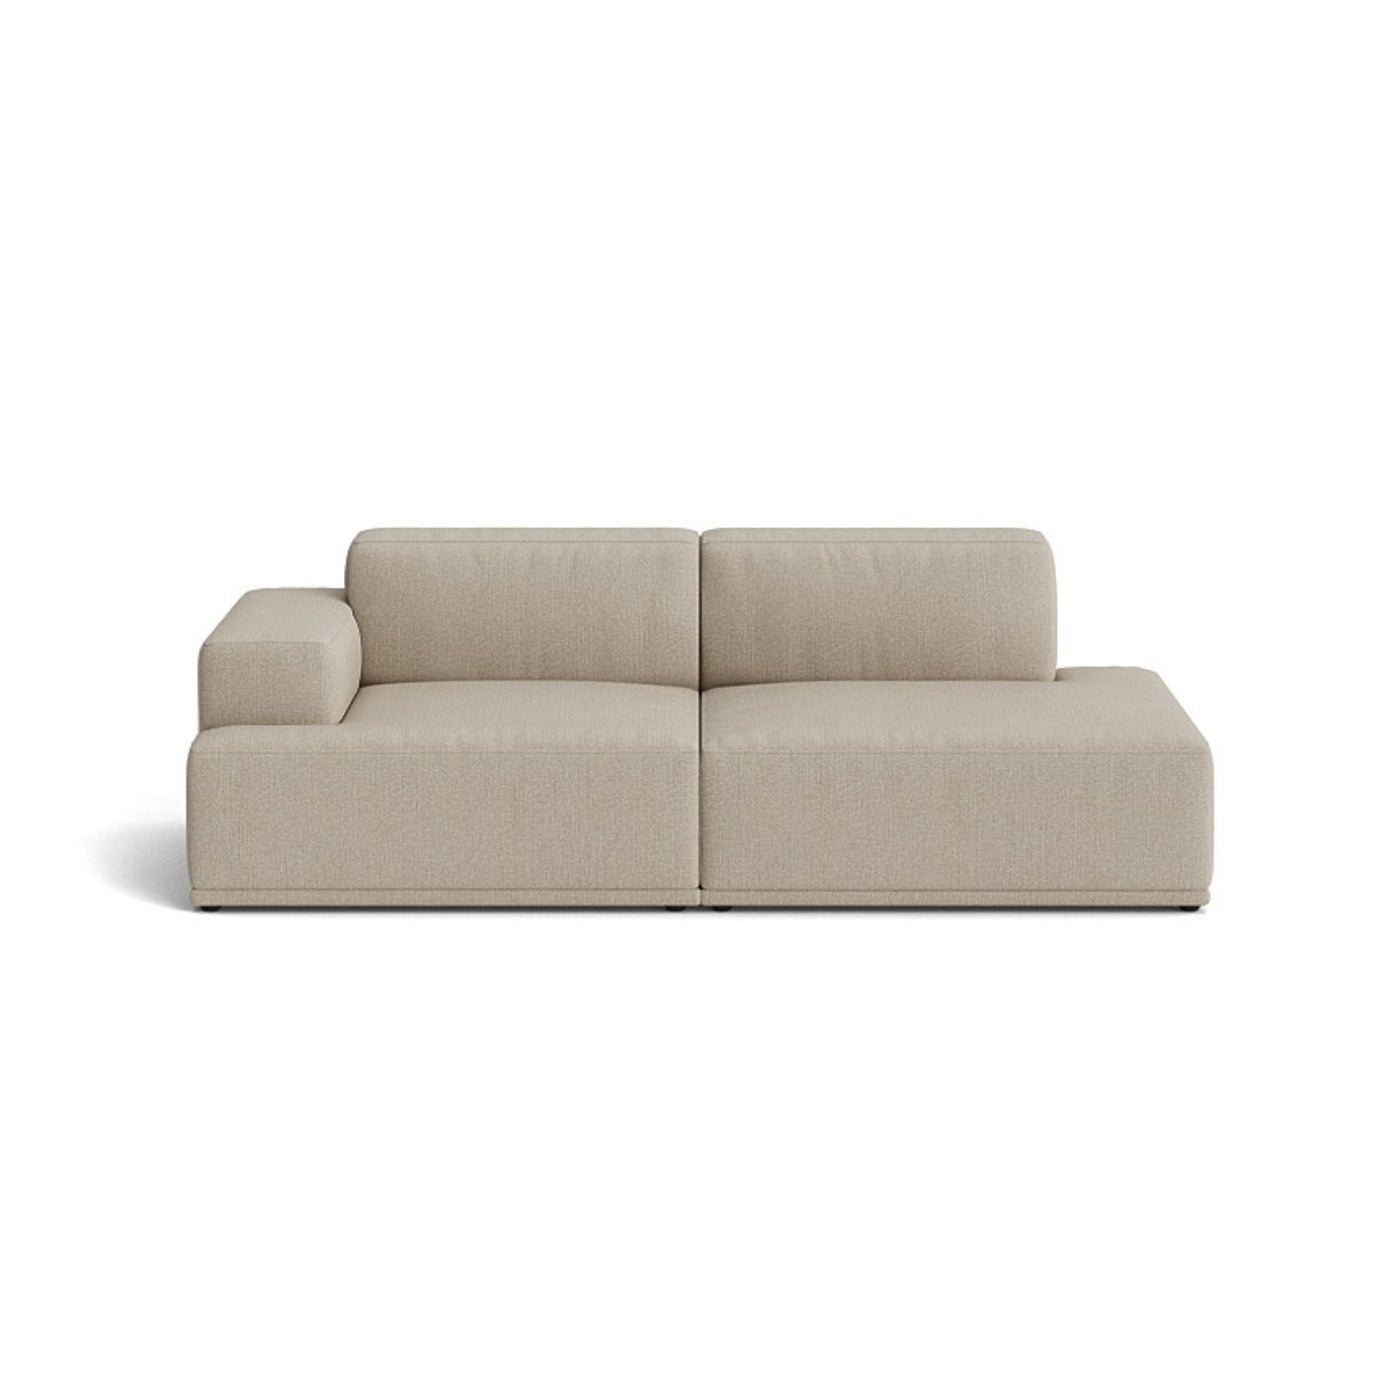 Muuto Connect Soft Modular 2 Seater Sofa, configuration 2. made-to-order from someday designs. #colour_clay-10